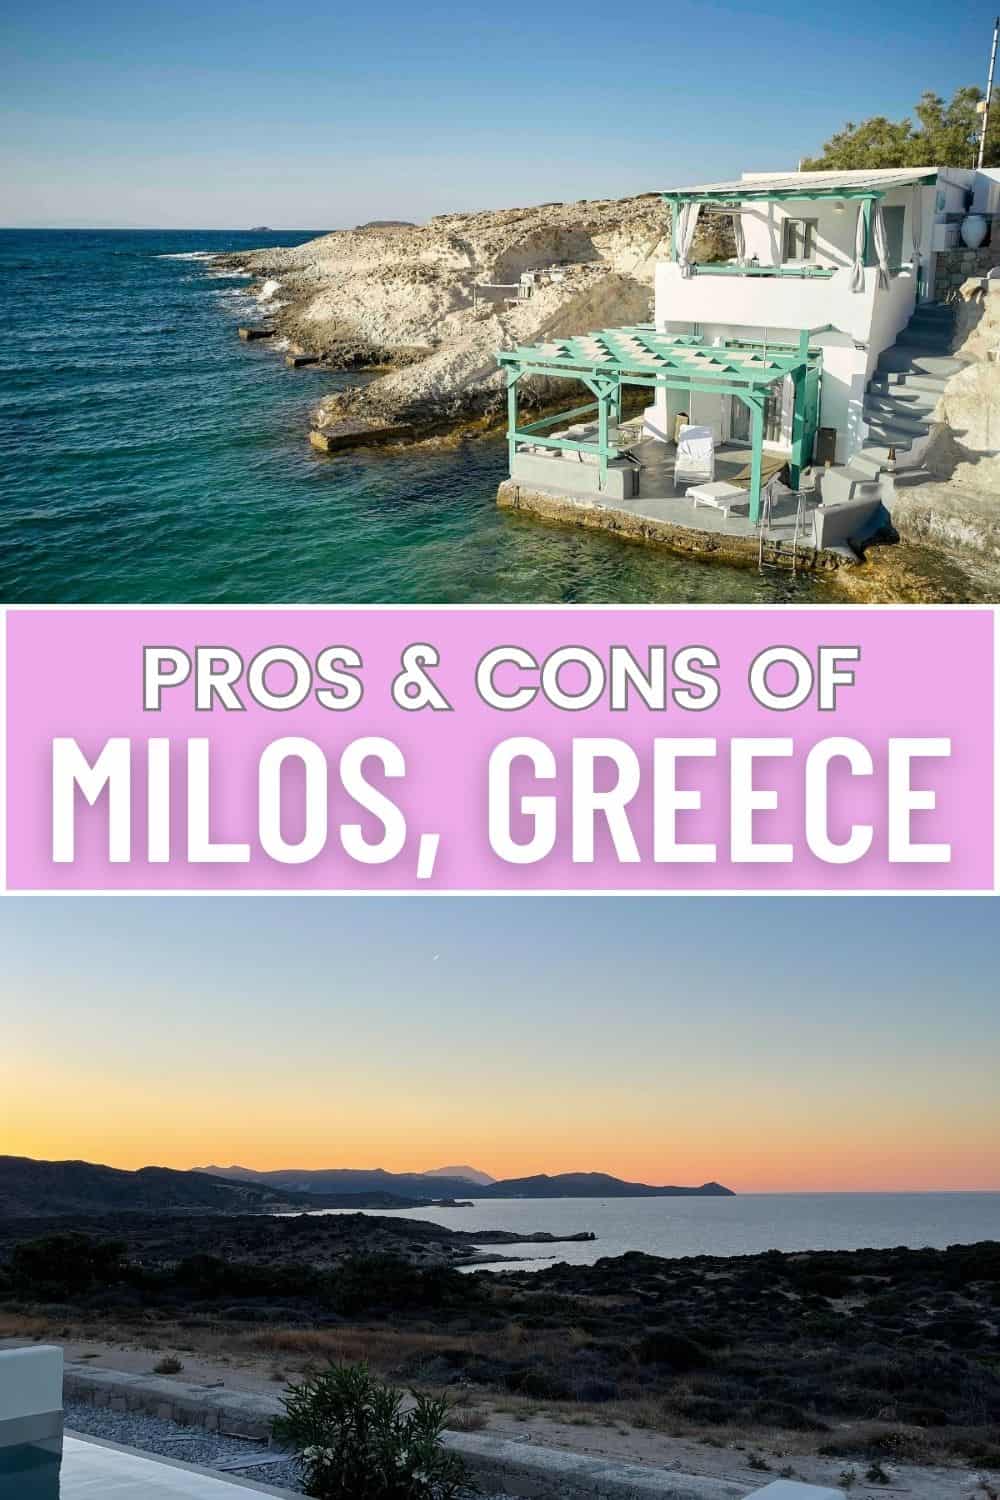 his image is also a promotional piece for a travel blog concerning the merits of visiting Milos, Greece. It depicts a tranquil coastal scene during sunset or sunrise with the sea stretching into the horizon, bordered by rocky terrain. A small, cozy, and inviting seaside establishment is visible, suggesting an intimate and picturesque setting for dining or accommodation. 